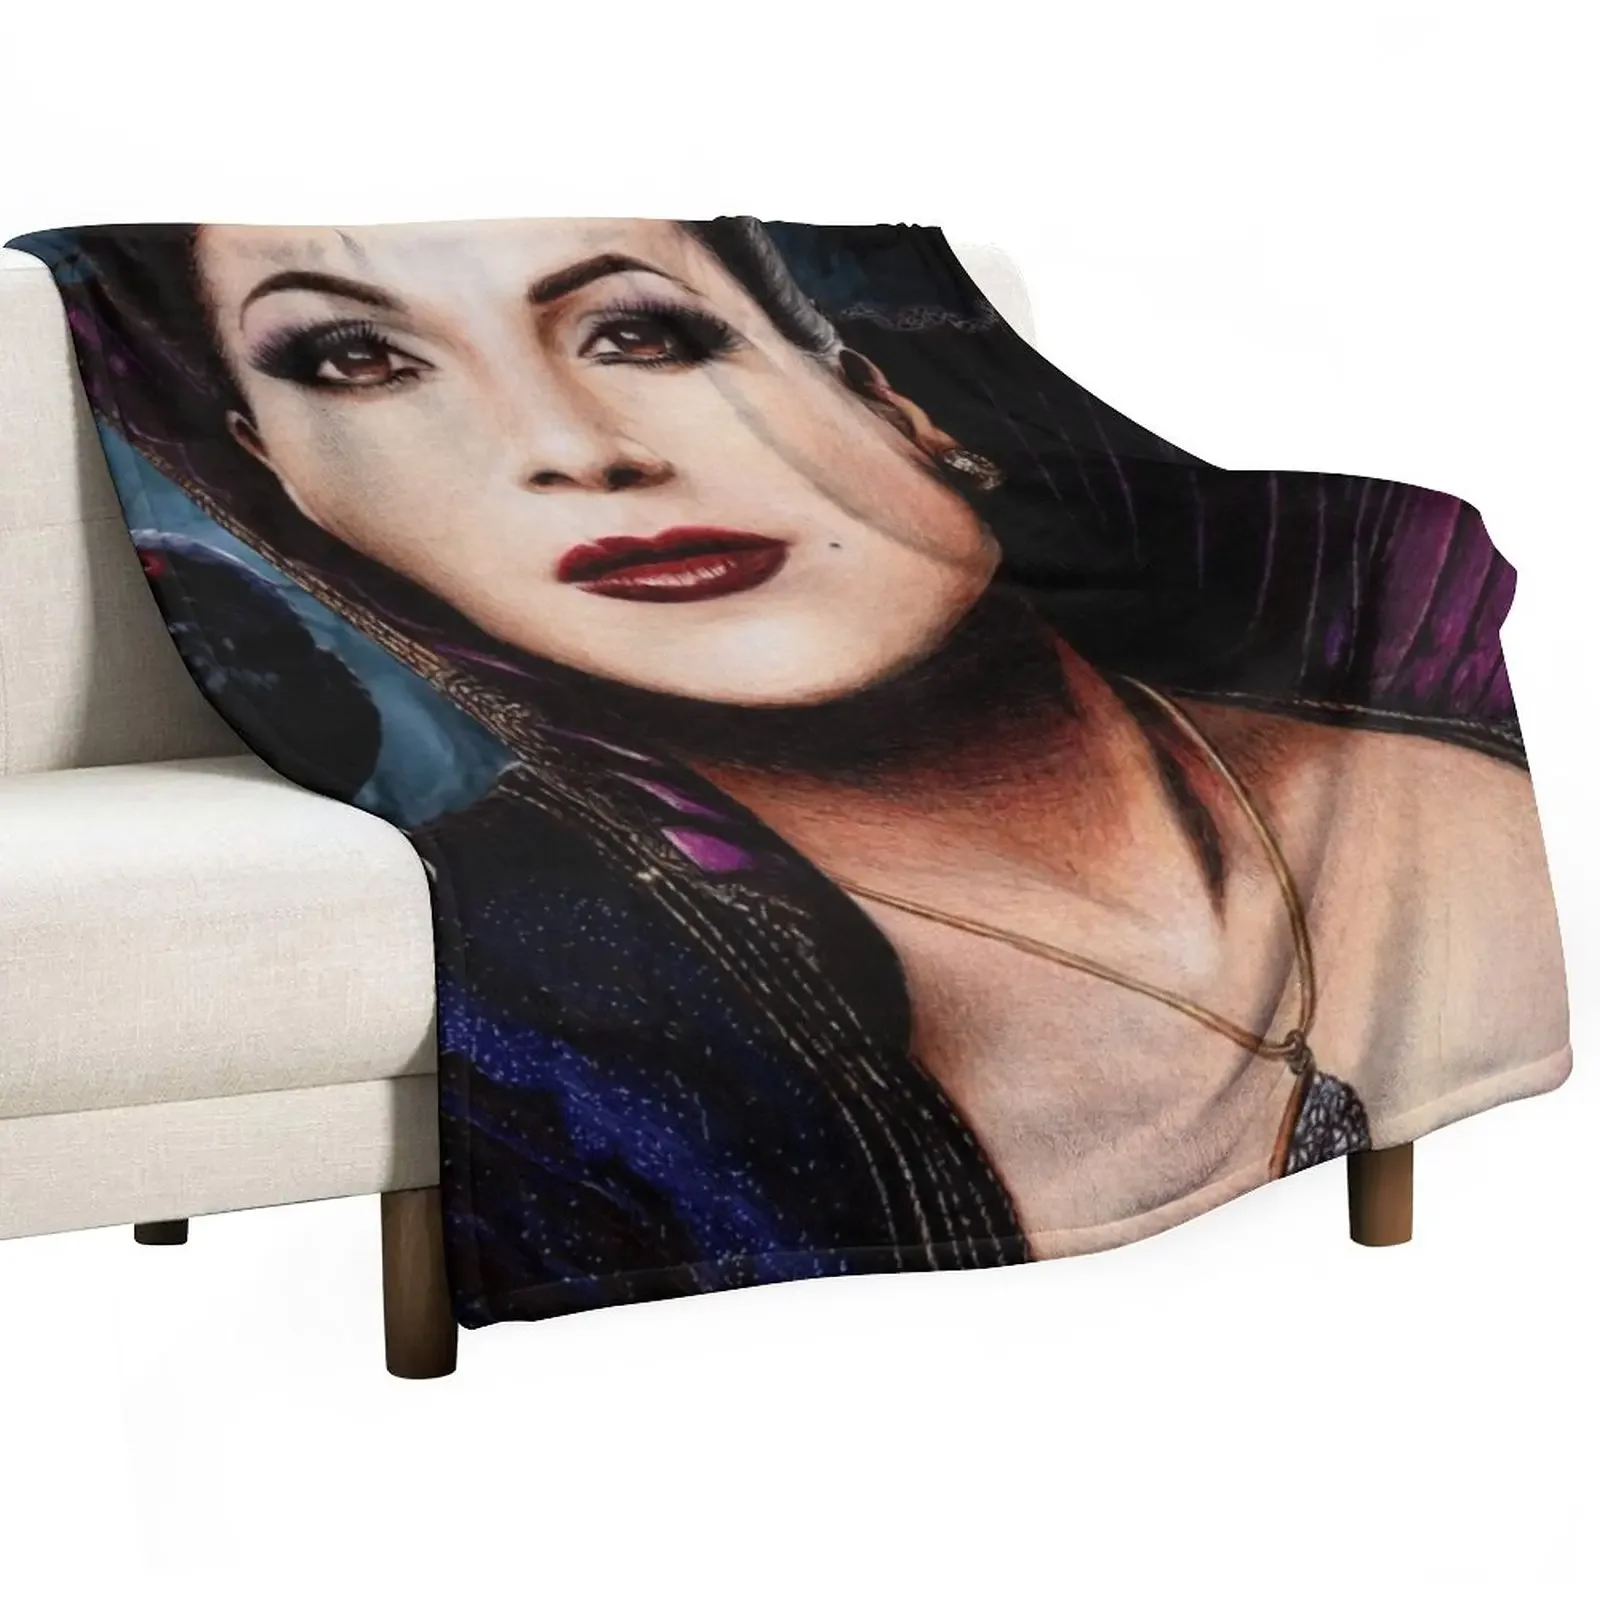 

ERP 125 (The Evil Queen) Throw Blanket Stuffeds Sleeping Bag Blankets Sofas Of Decoration Extra Large Throw Blankets